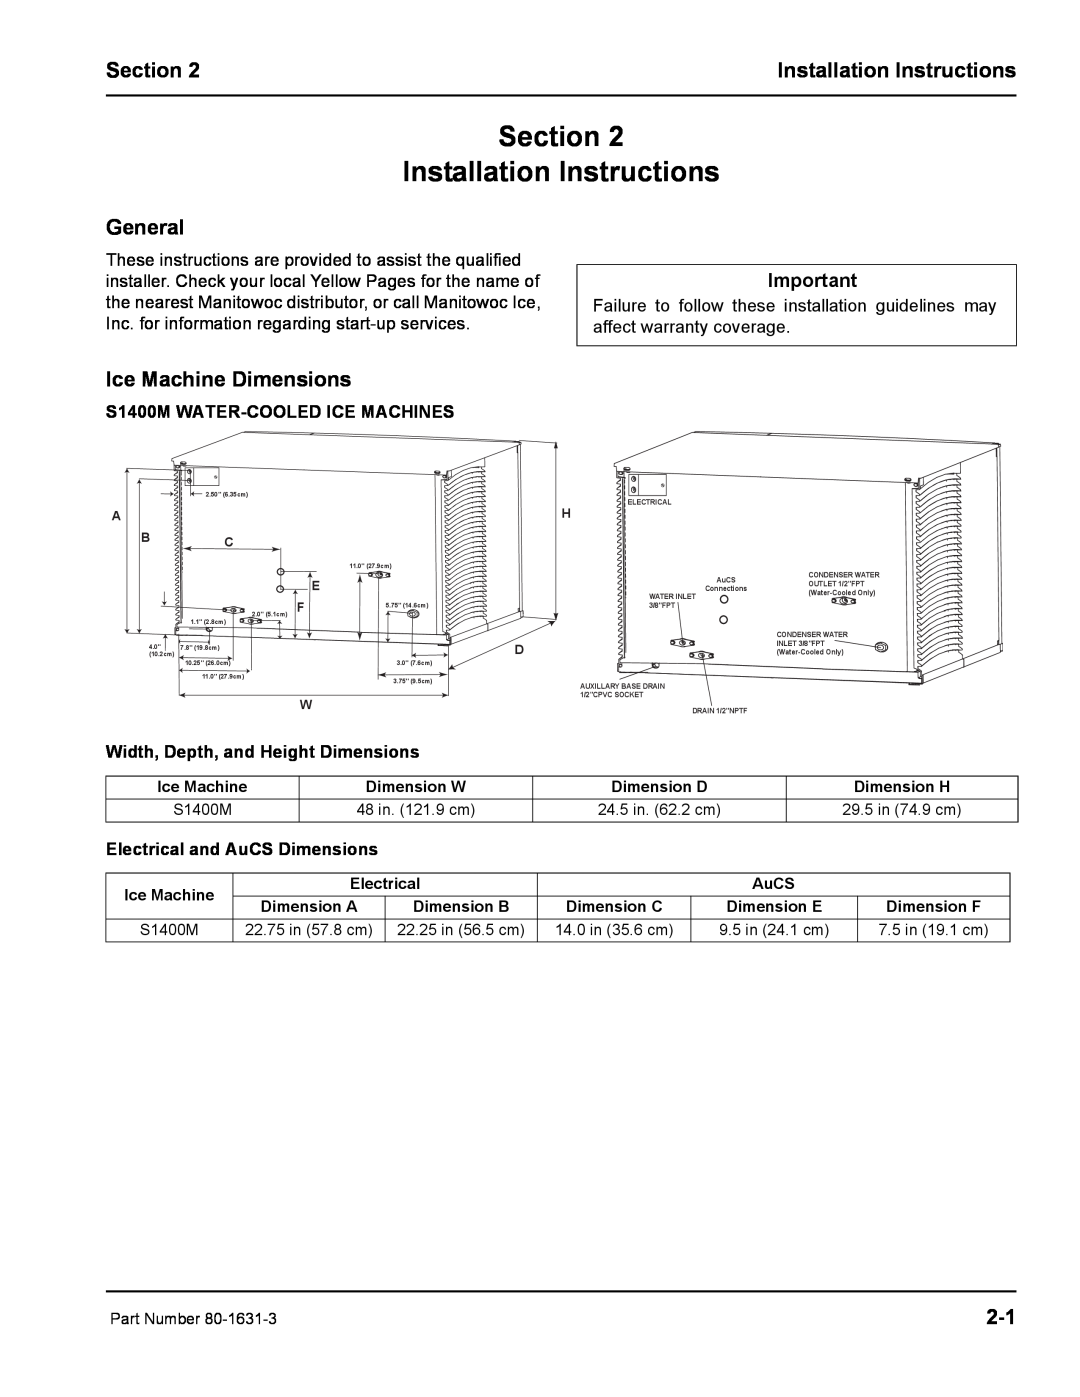 Manitowoc Ice manual Section Installation Instructions, General, Ice Machine Dimensions, S1400M WATER-COOLEDICE MACHINES 